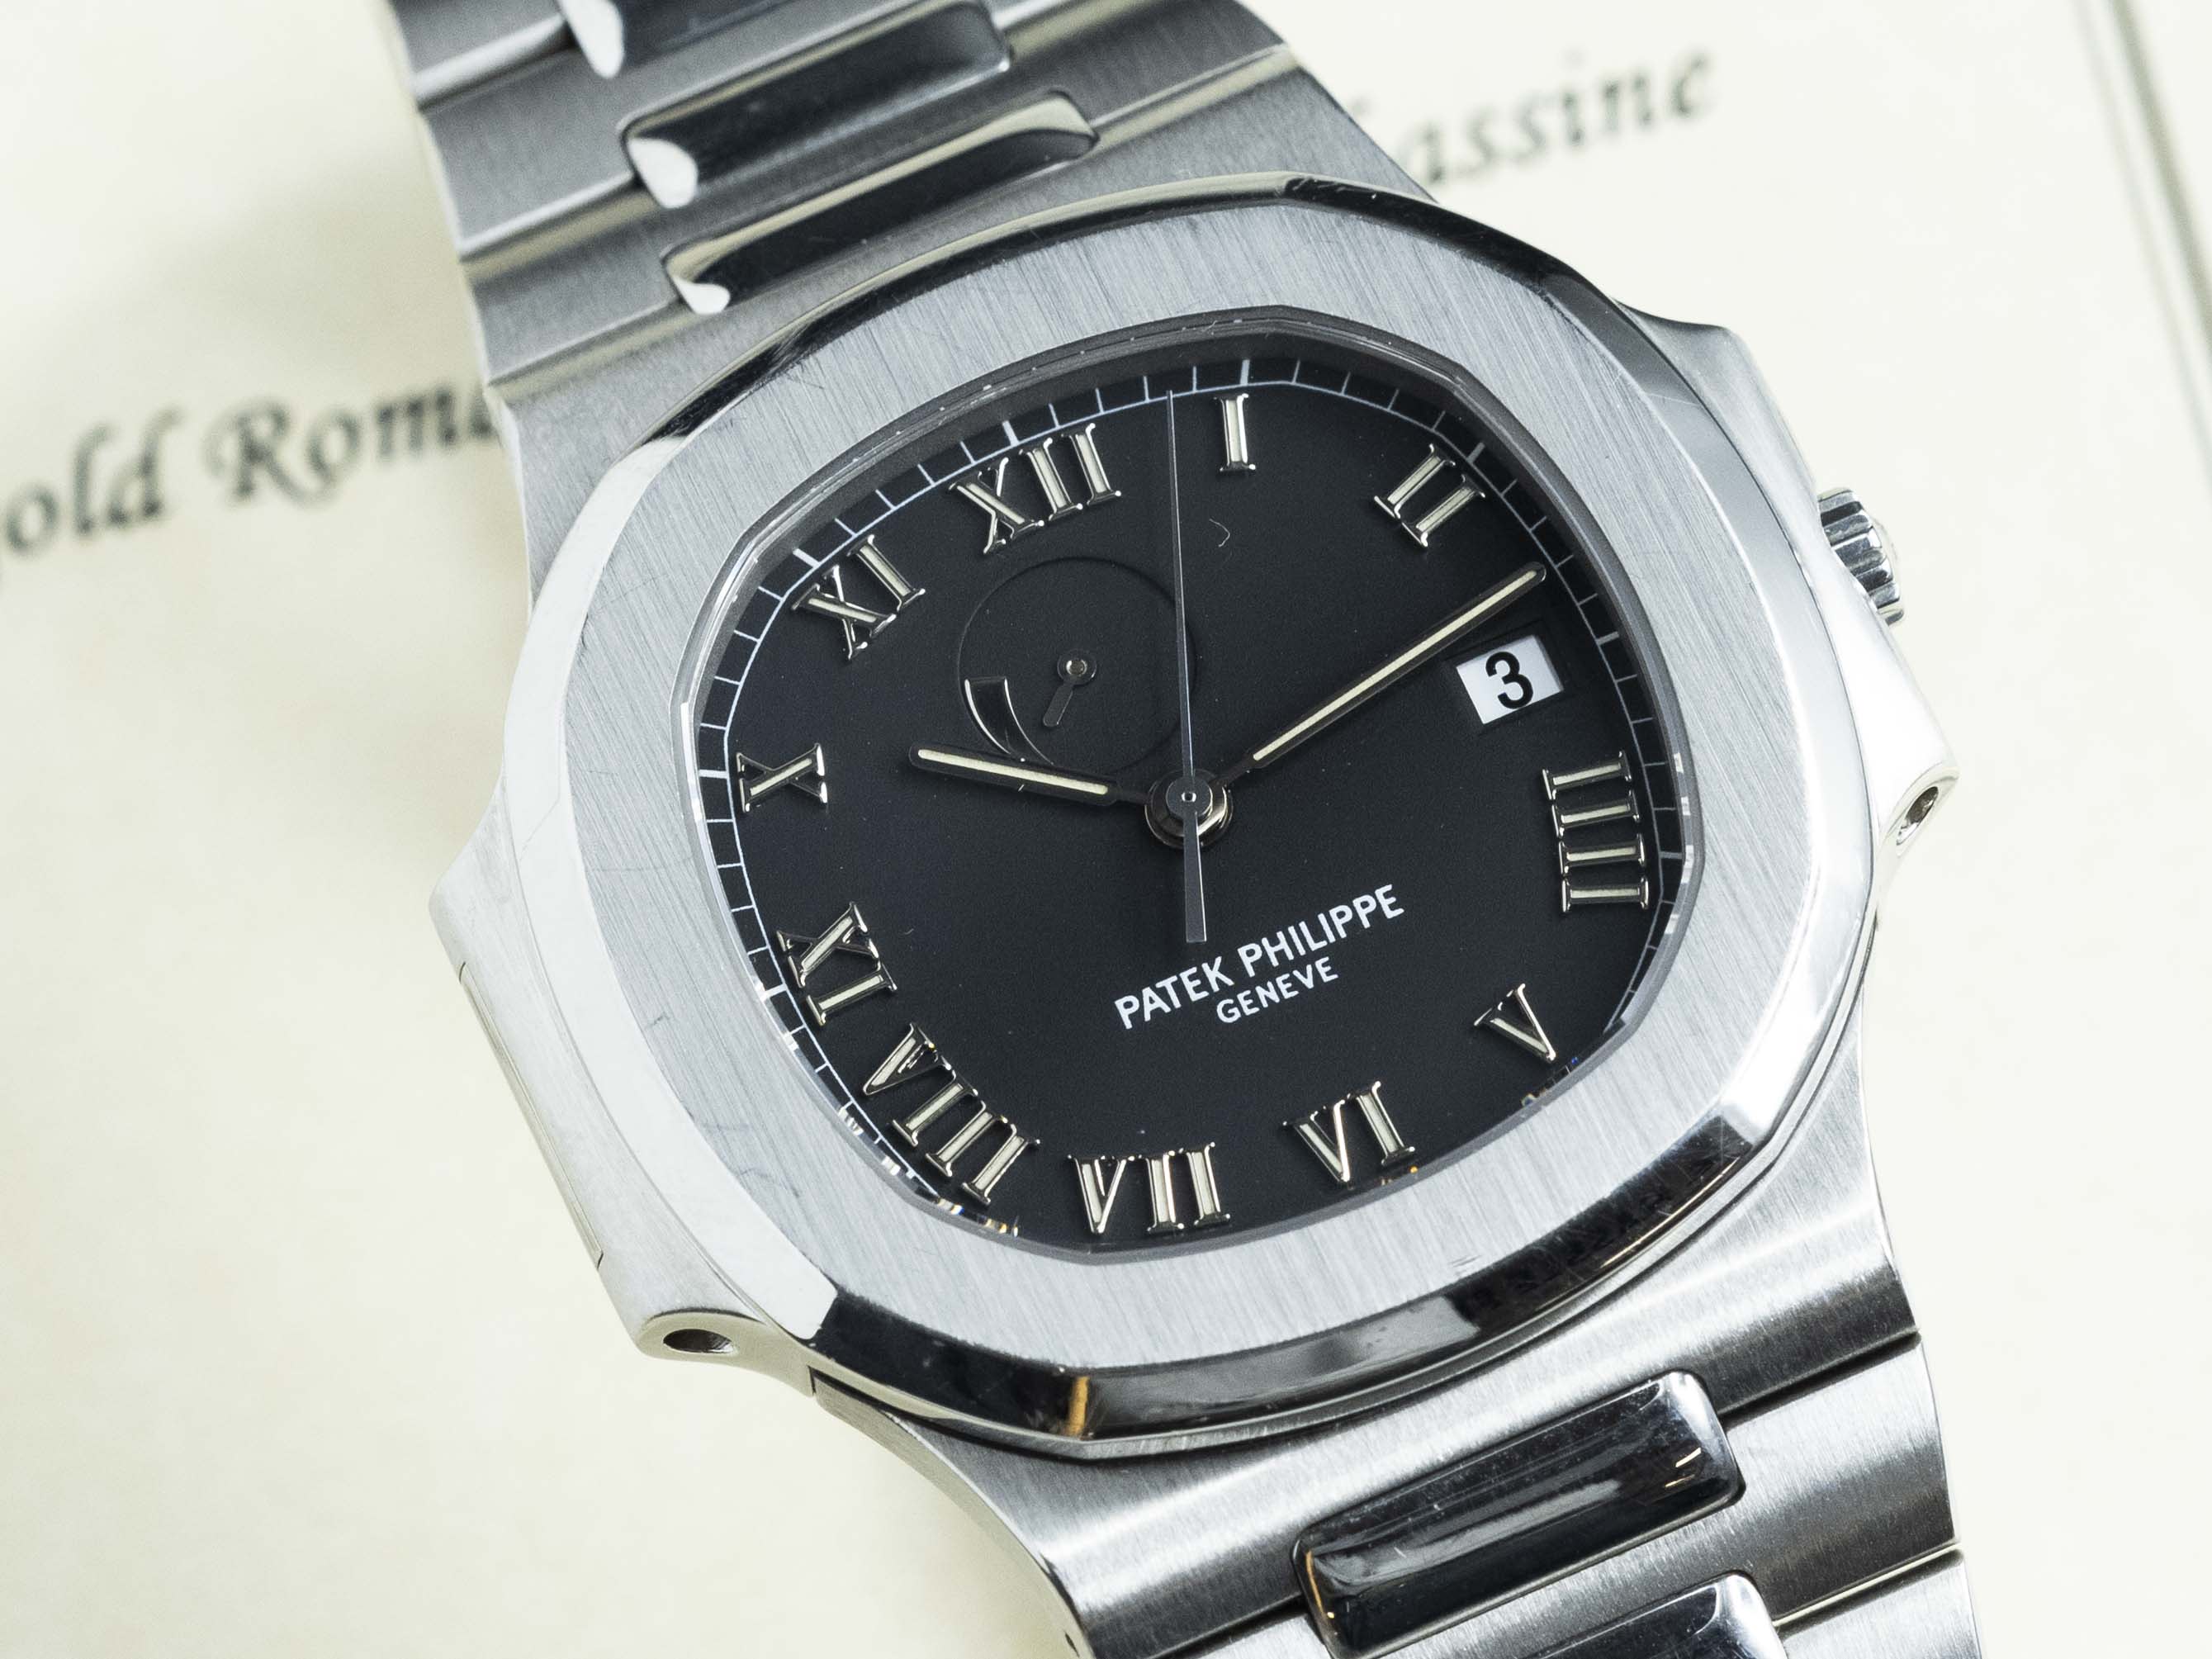 A rare and collectable reference launched in the '90s that features a power reserve indicator - the first complication seen on the Nautilus outside of a date. 1